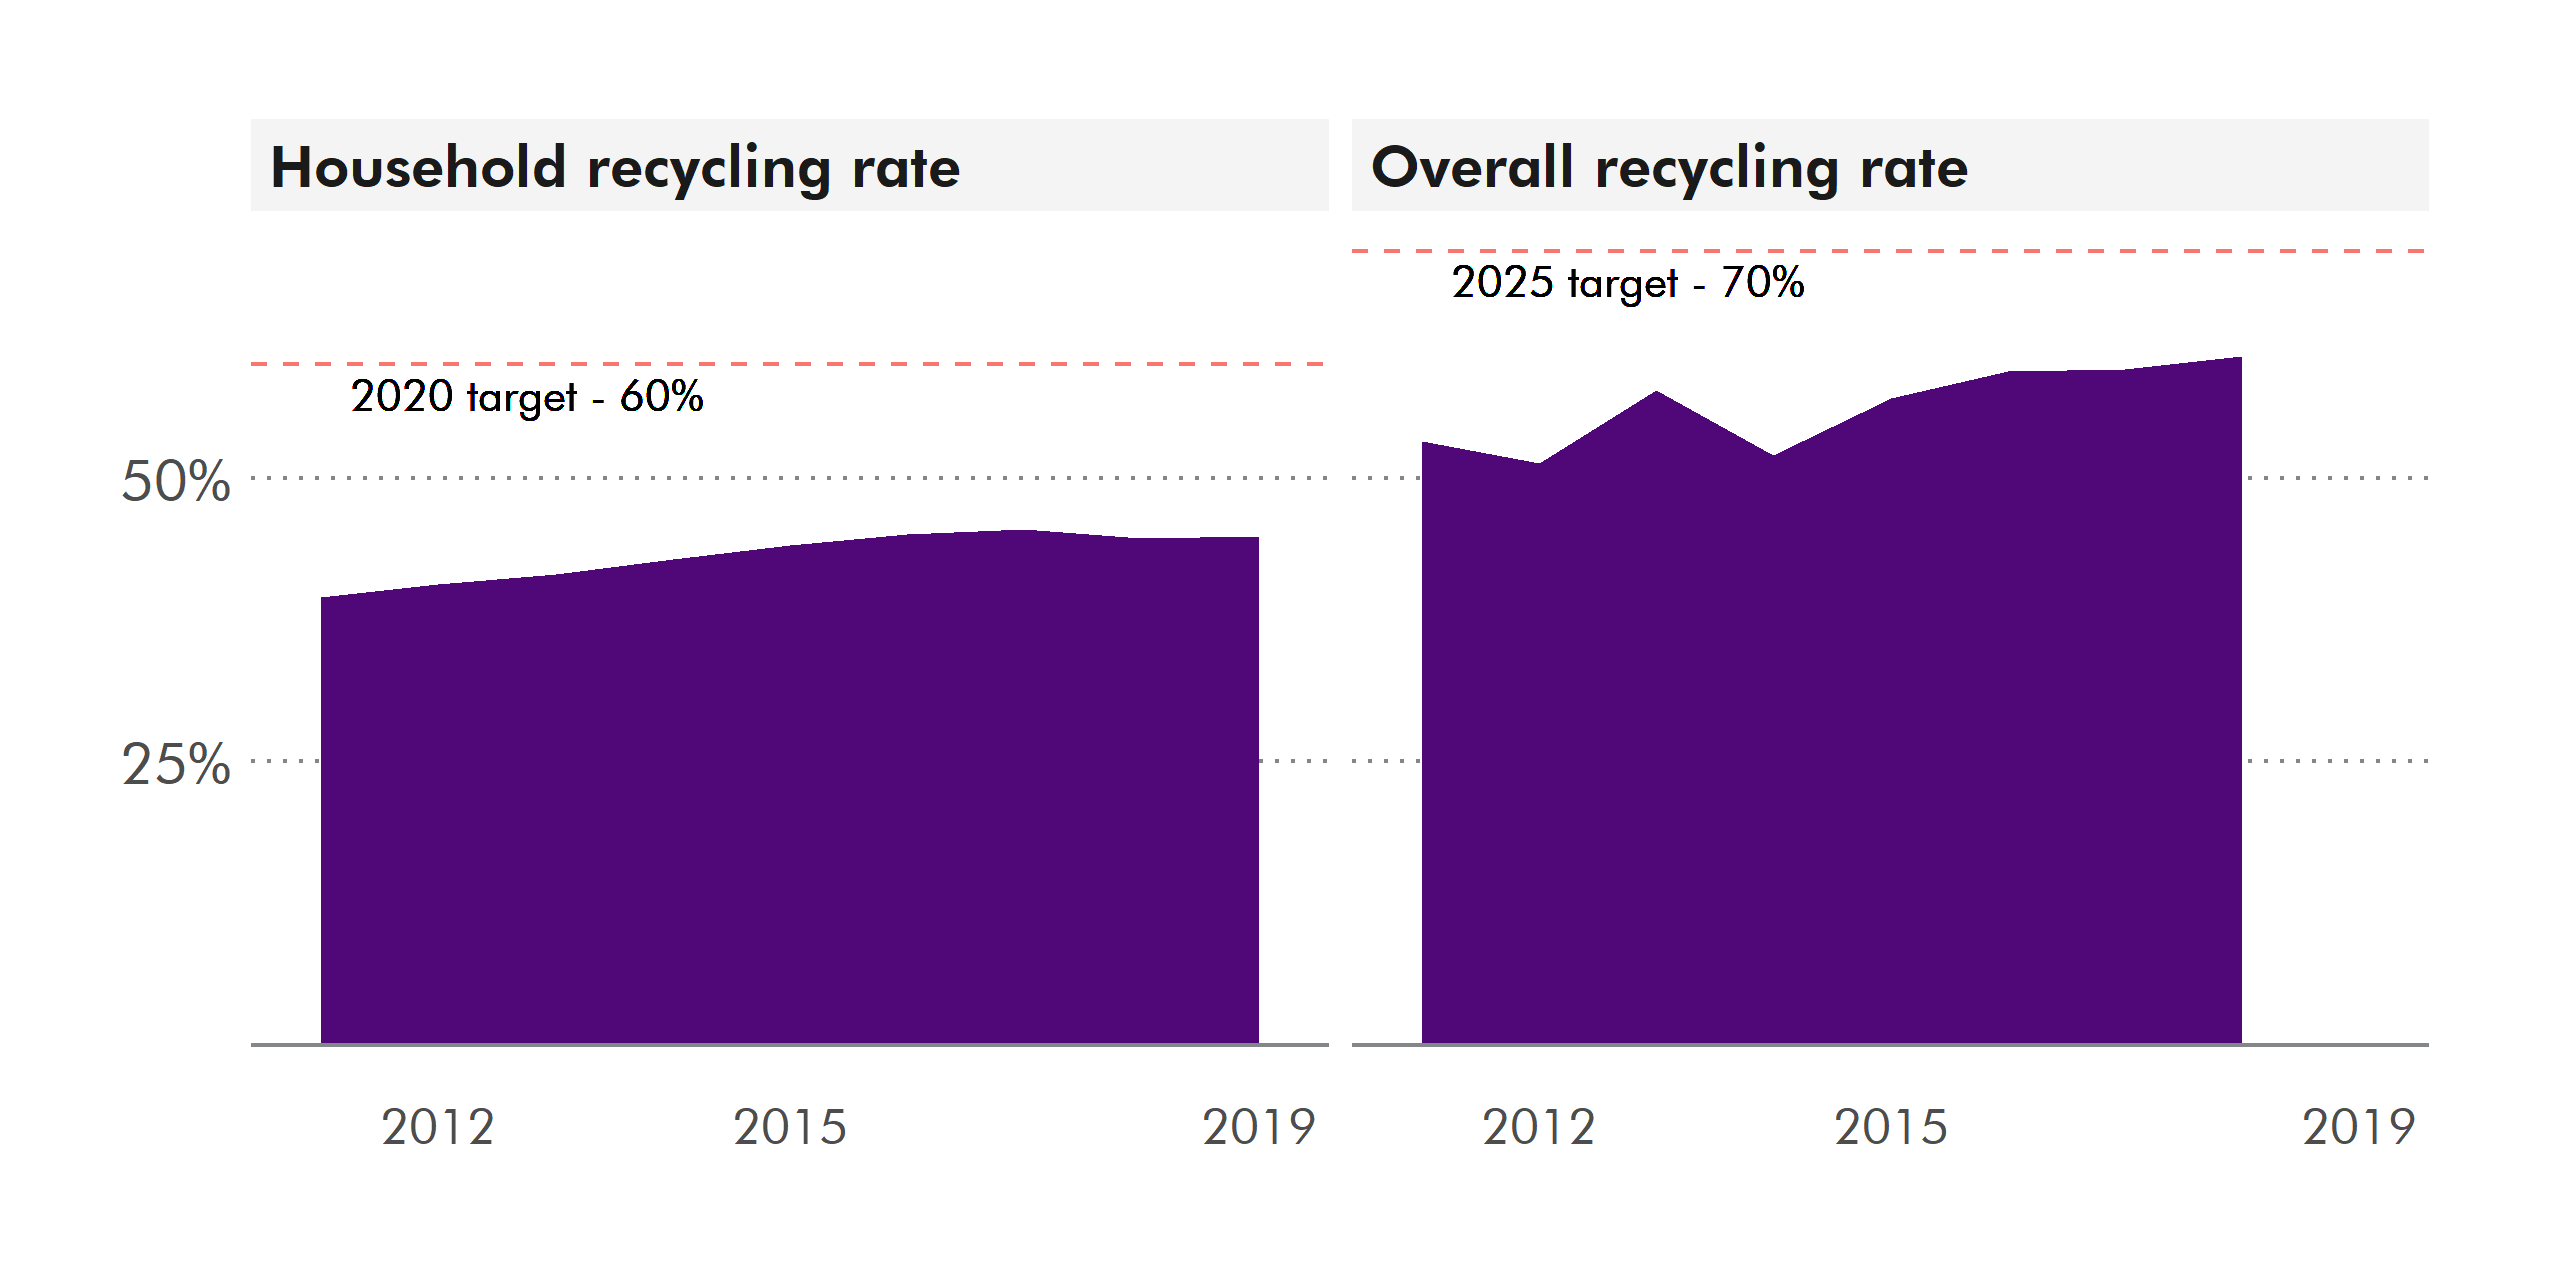 The recycling rate for all waste in 2018 was 60.7%, an increase from 59.6% of waste recycled in 2017. In 2018 the household waste recycling rate was 44.7%, a decrease from the 45.5% rate achieved in 2017.